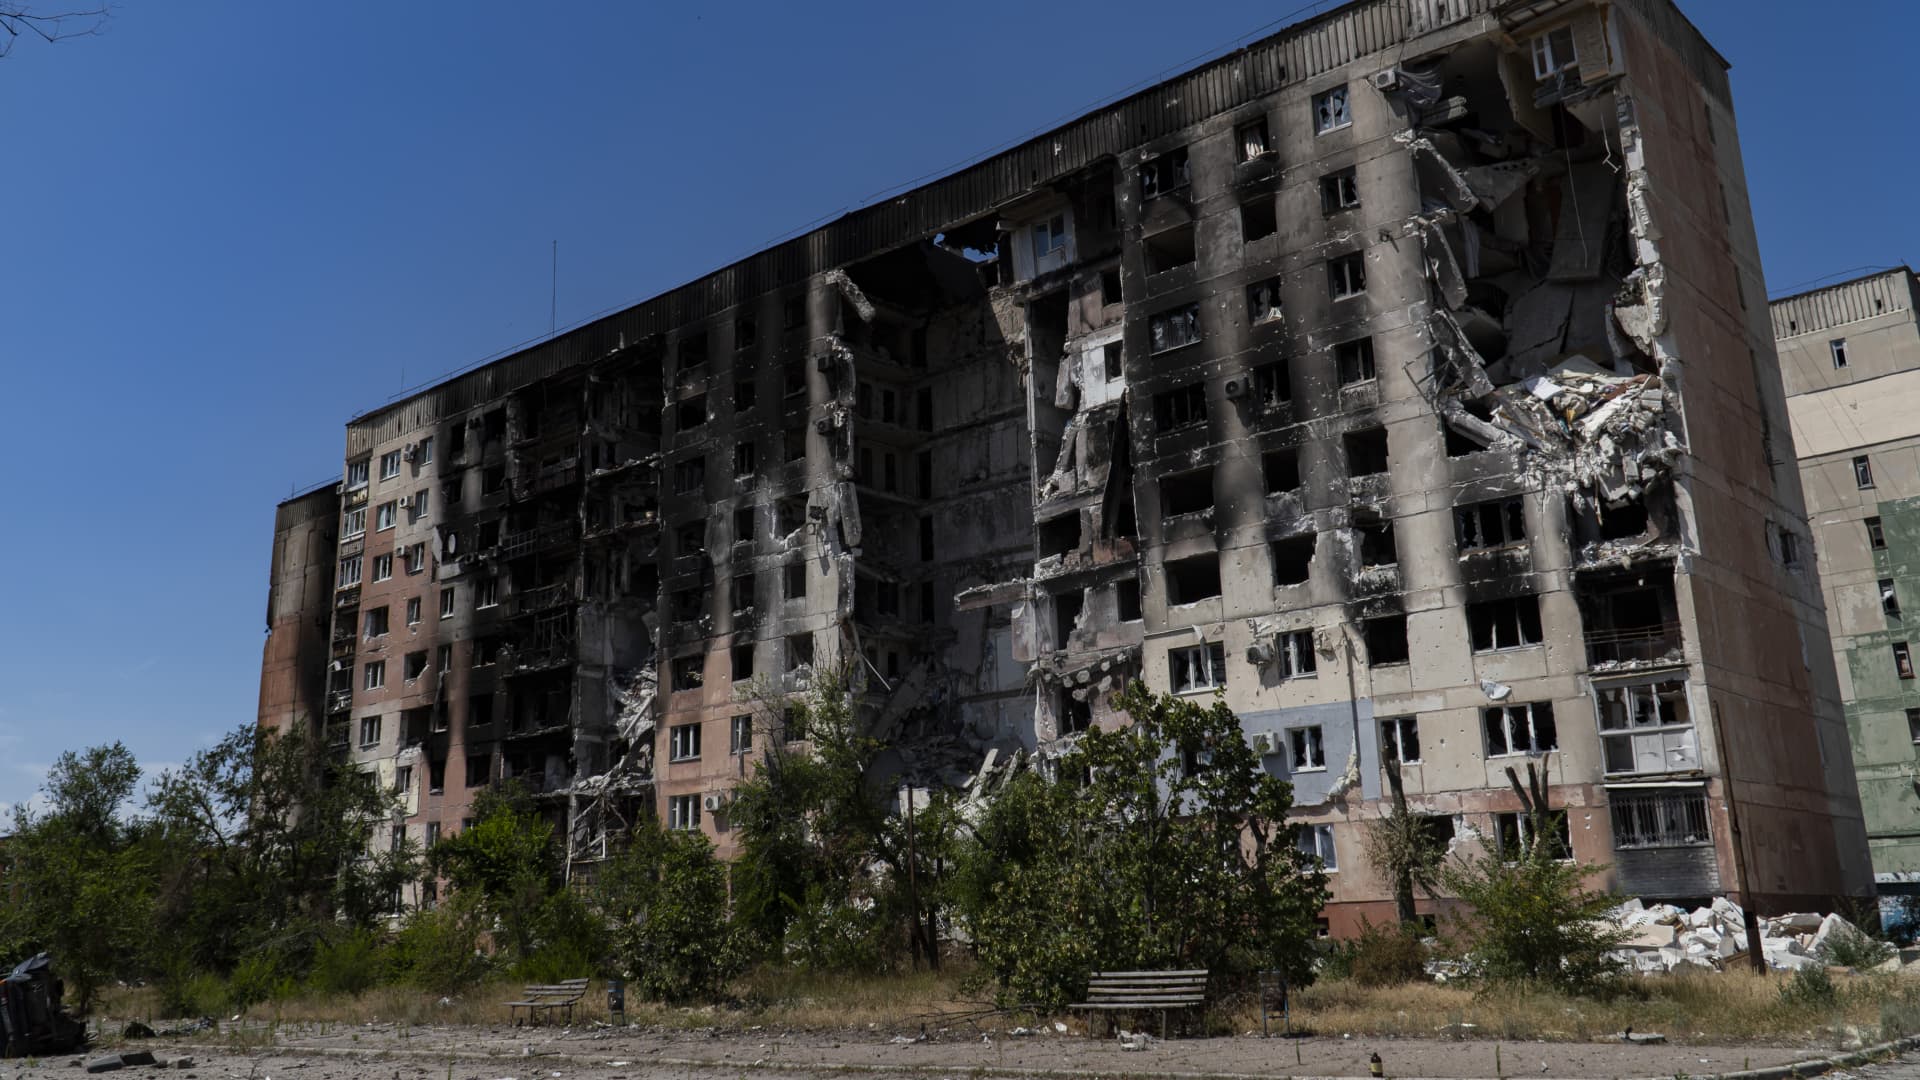 A view of damaged sites from eastern Ukraine city of Severodonetsk located in which Russian forces now in control, in Luhansk Oblast, Ukraine on July 09, 2022.